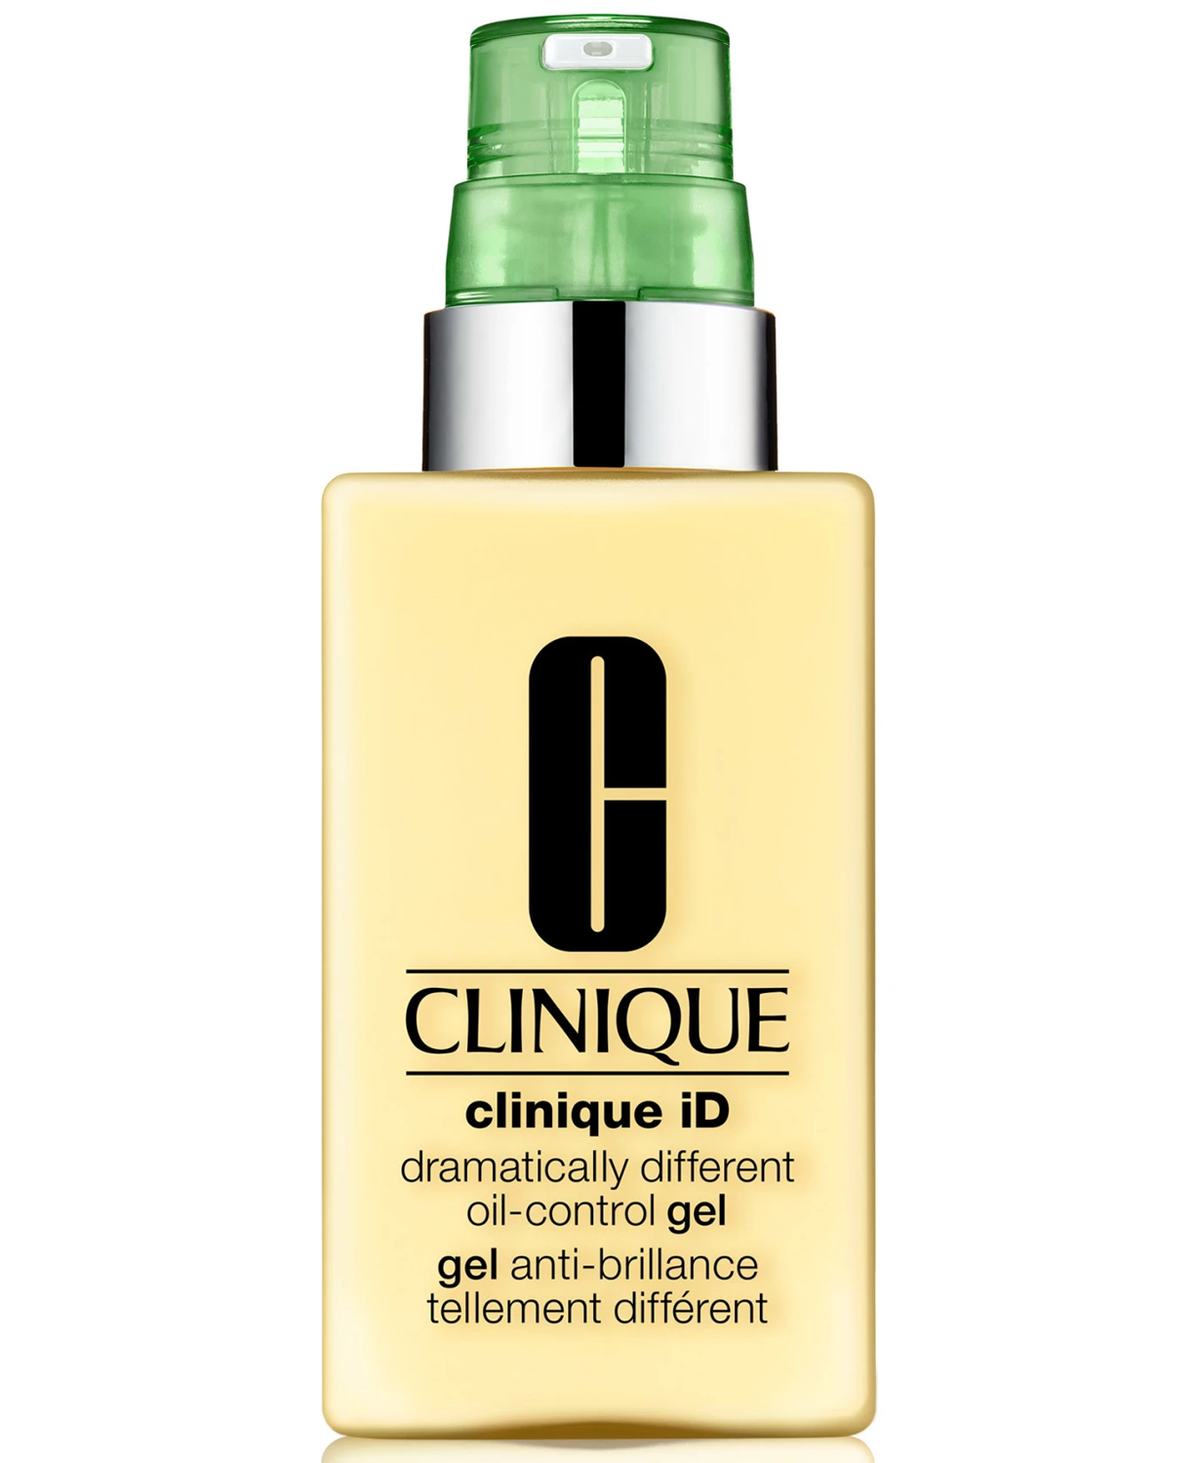 Clinique iD Dramatically Different Oil-Control Gel With Active Cartridge Concentrate™ For Irritation, 4.2 oz